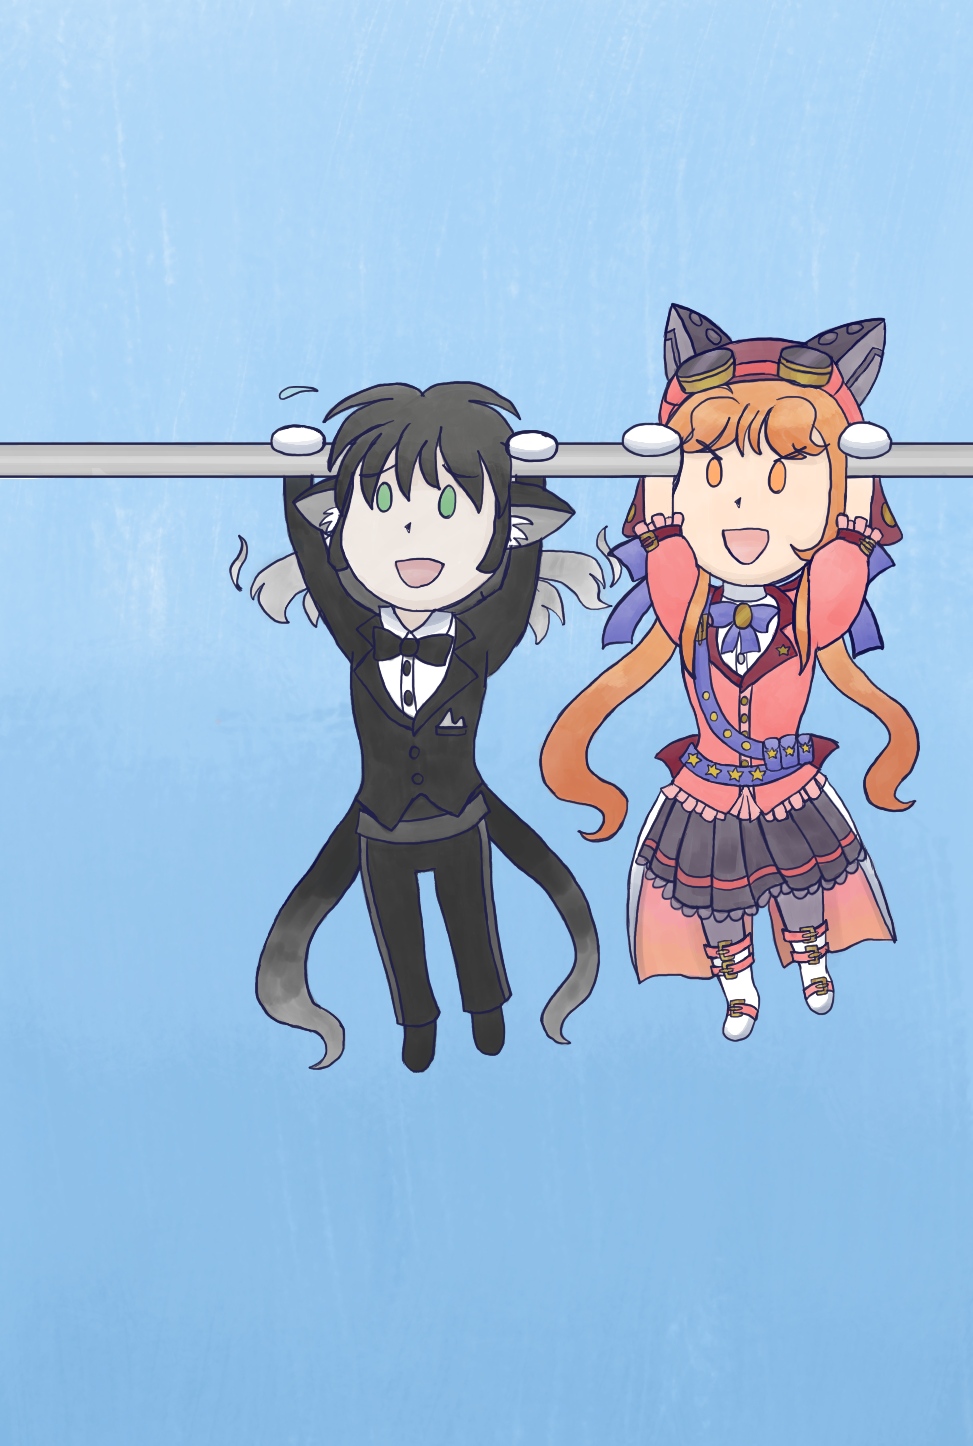 Image description: A pair of chibi-style characters hanging from a bar. Both of them have cat ears; the person on the left is a long-haired ghostly cat man in a tuxedo and is struggling to hold onto the bar; the person on the right is a woman with a fancy steampunk dress with mechanical cat ears poking through her hat. She has long hair in pigtails and is confidently holding onto the bar.